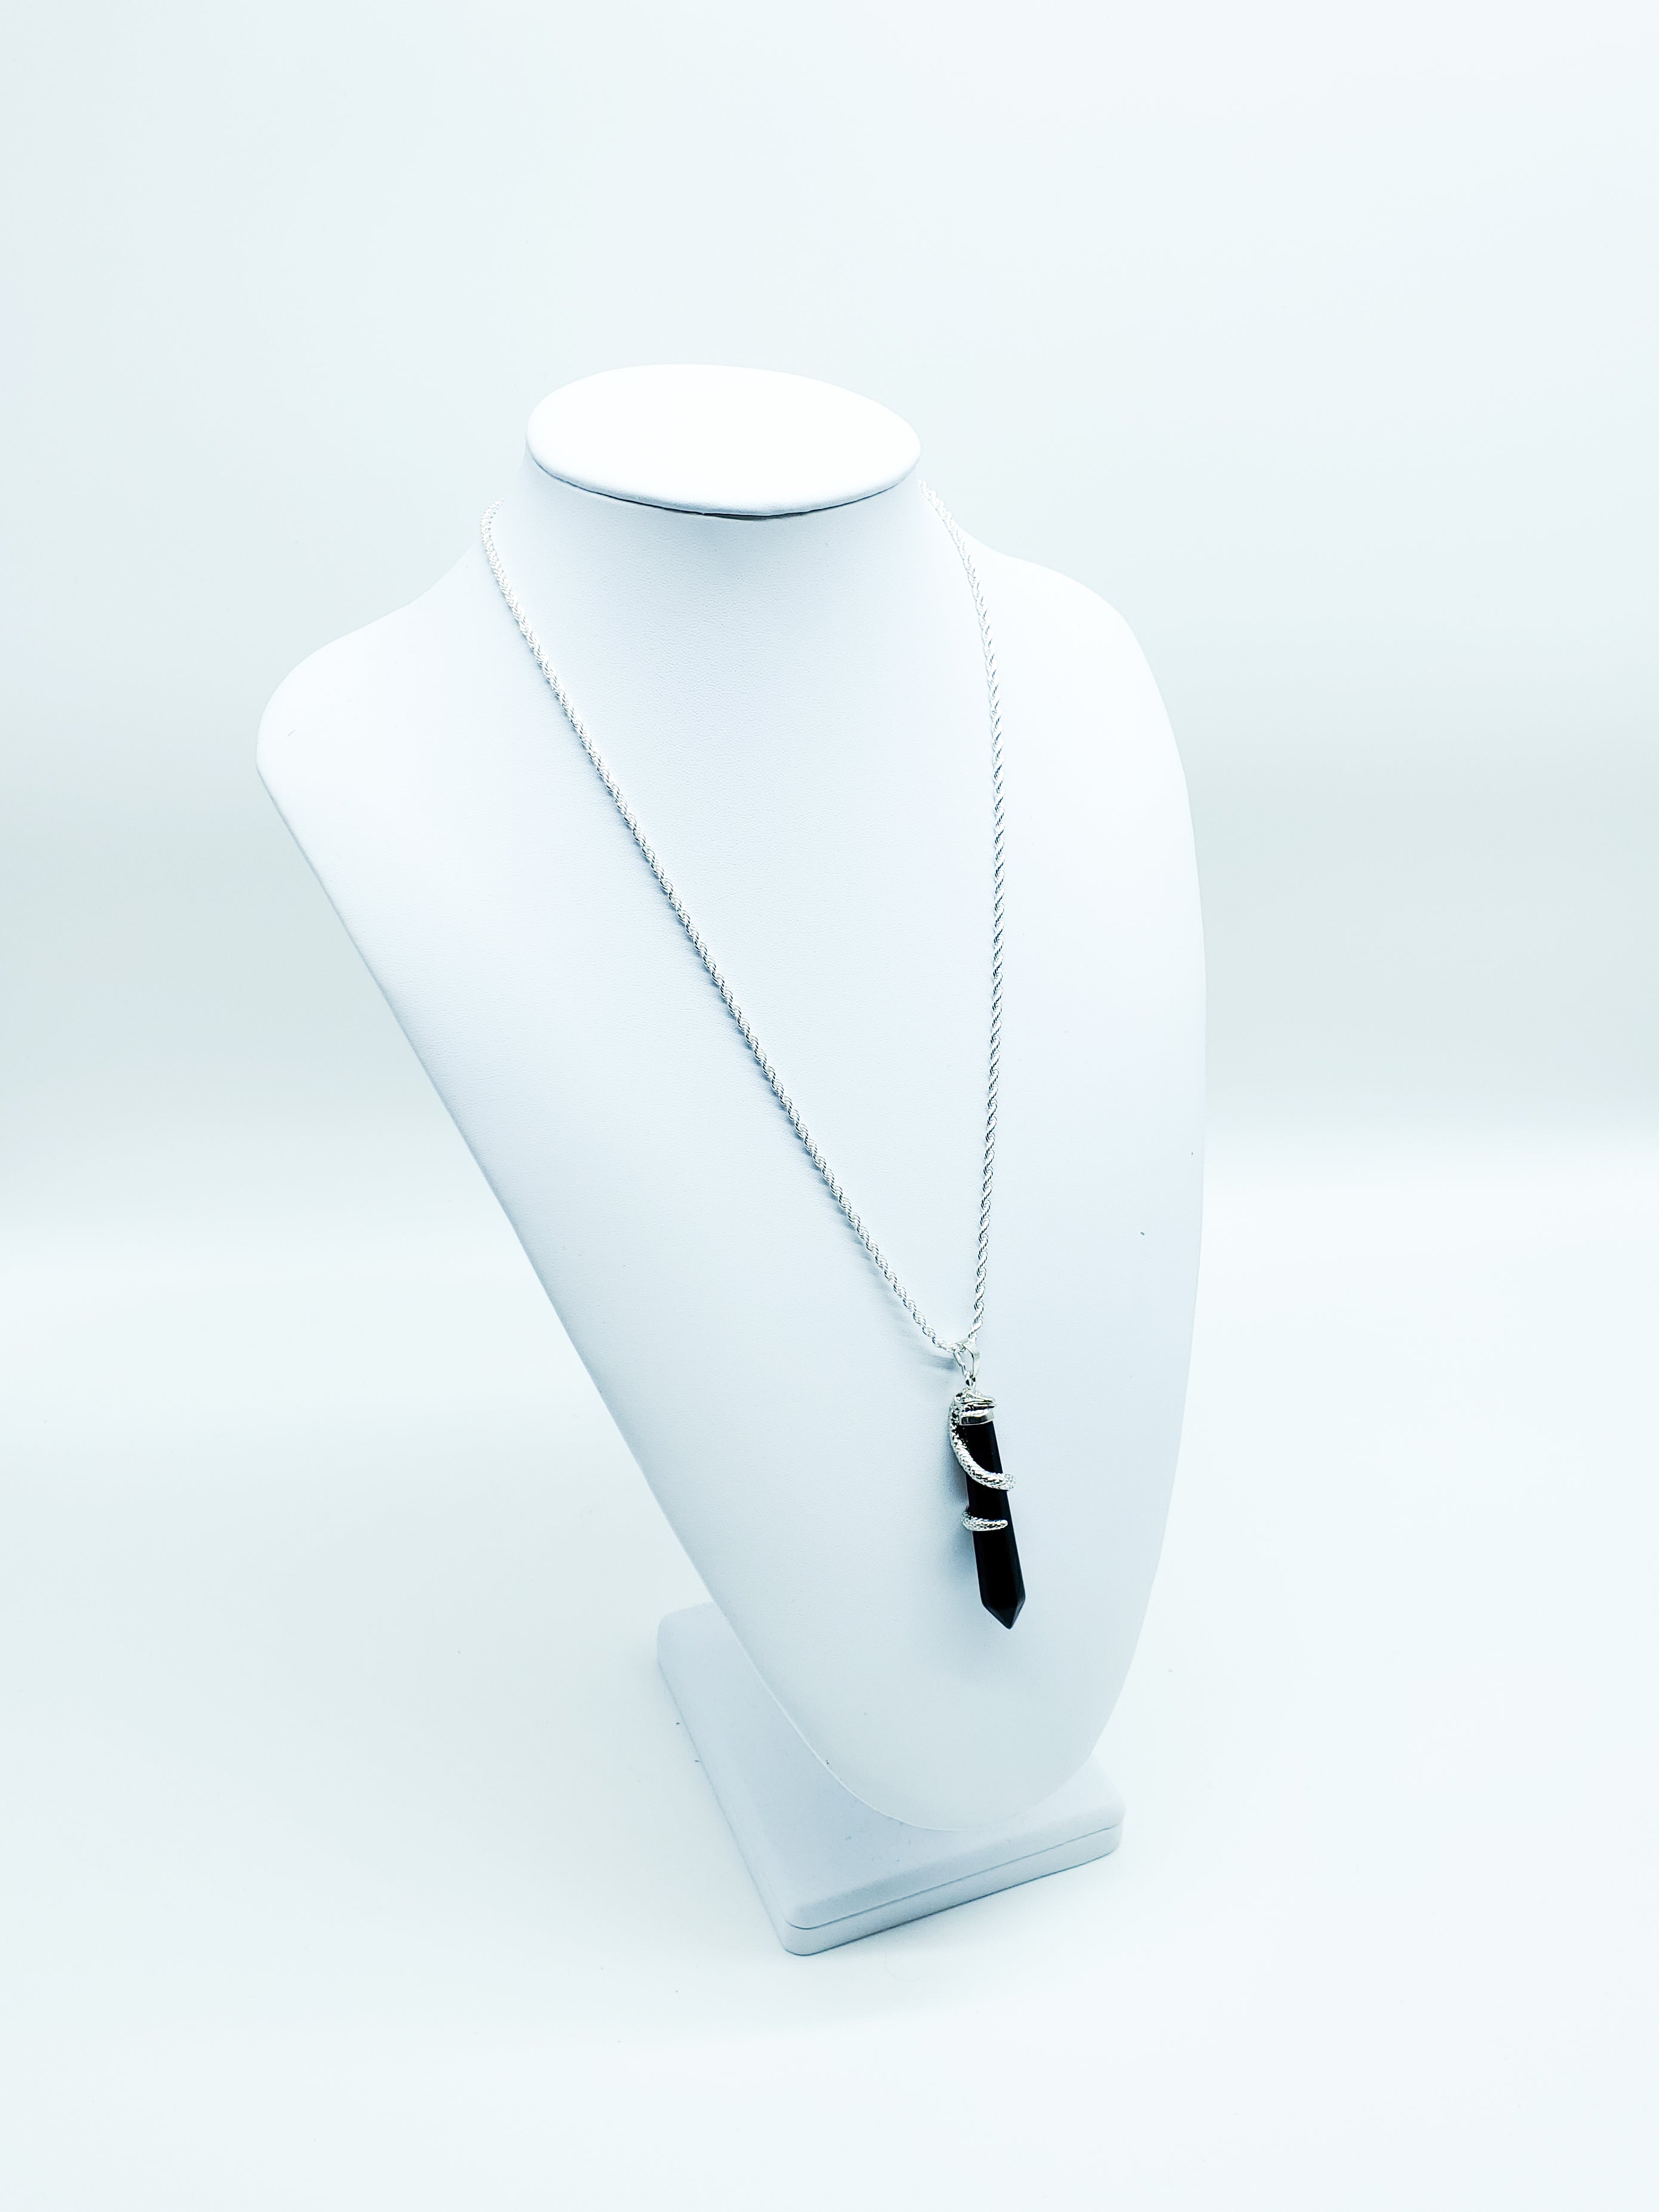 Onyx Necklace with Silver Plated Snake on a Sterling Silver Rope Chain - The Caffeinated Raven